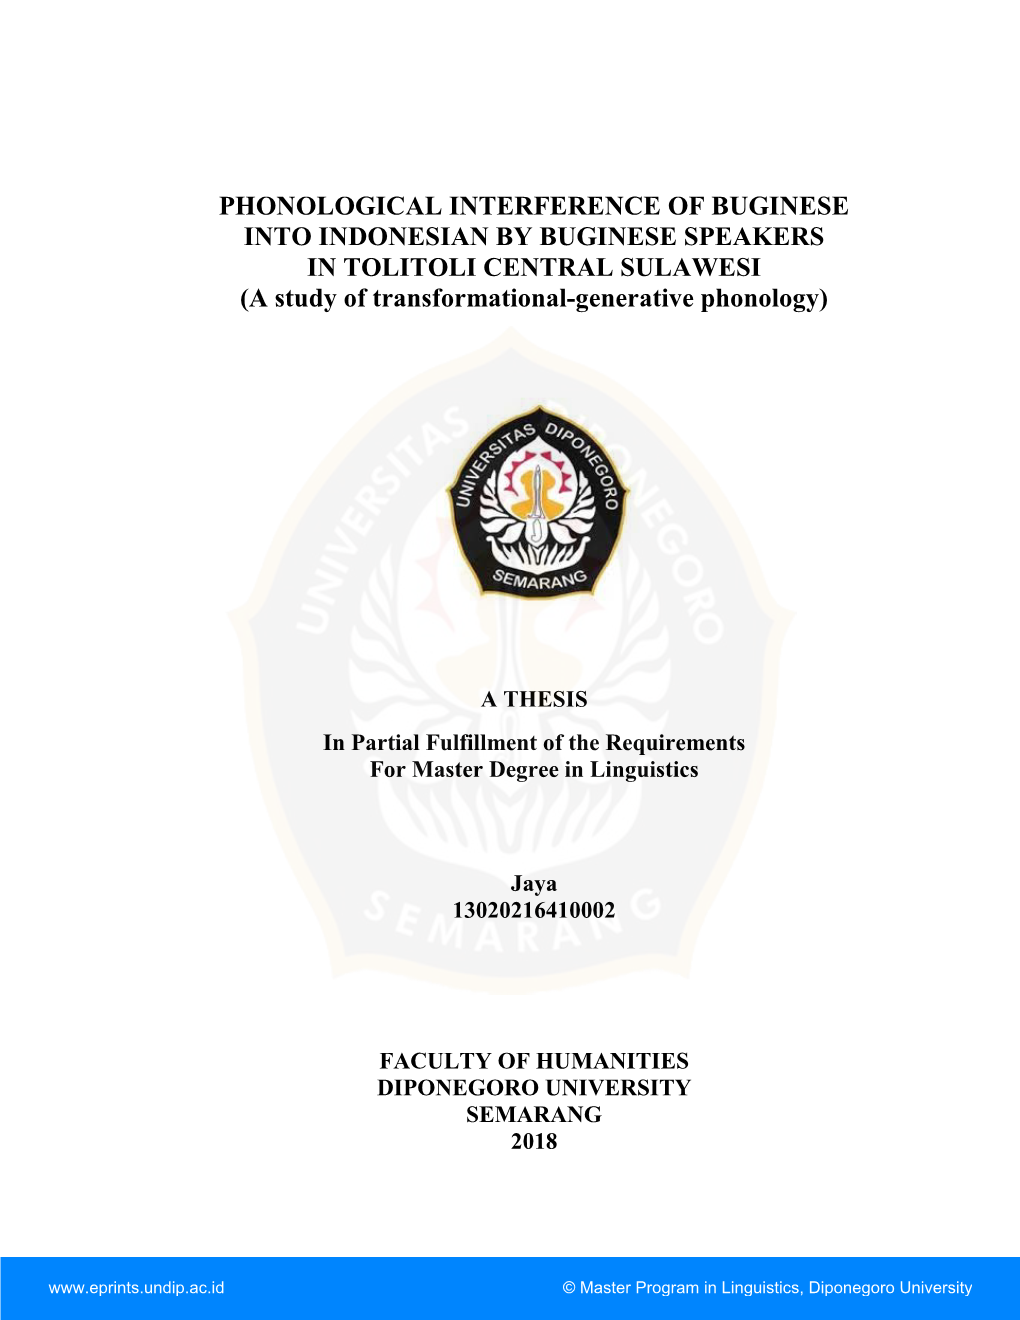 PHONOLOGICAL INTERFERENCE of BUGINESE INTO INDONESIAN by BUGINESE SPEAKERS in TOLITOLI CENTRAL SULAWESI (A Study of Transformational-Generative Phonology)